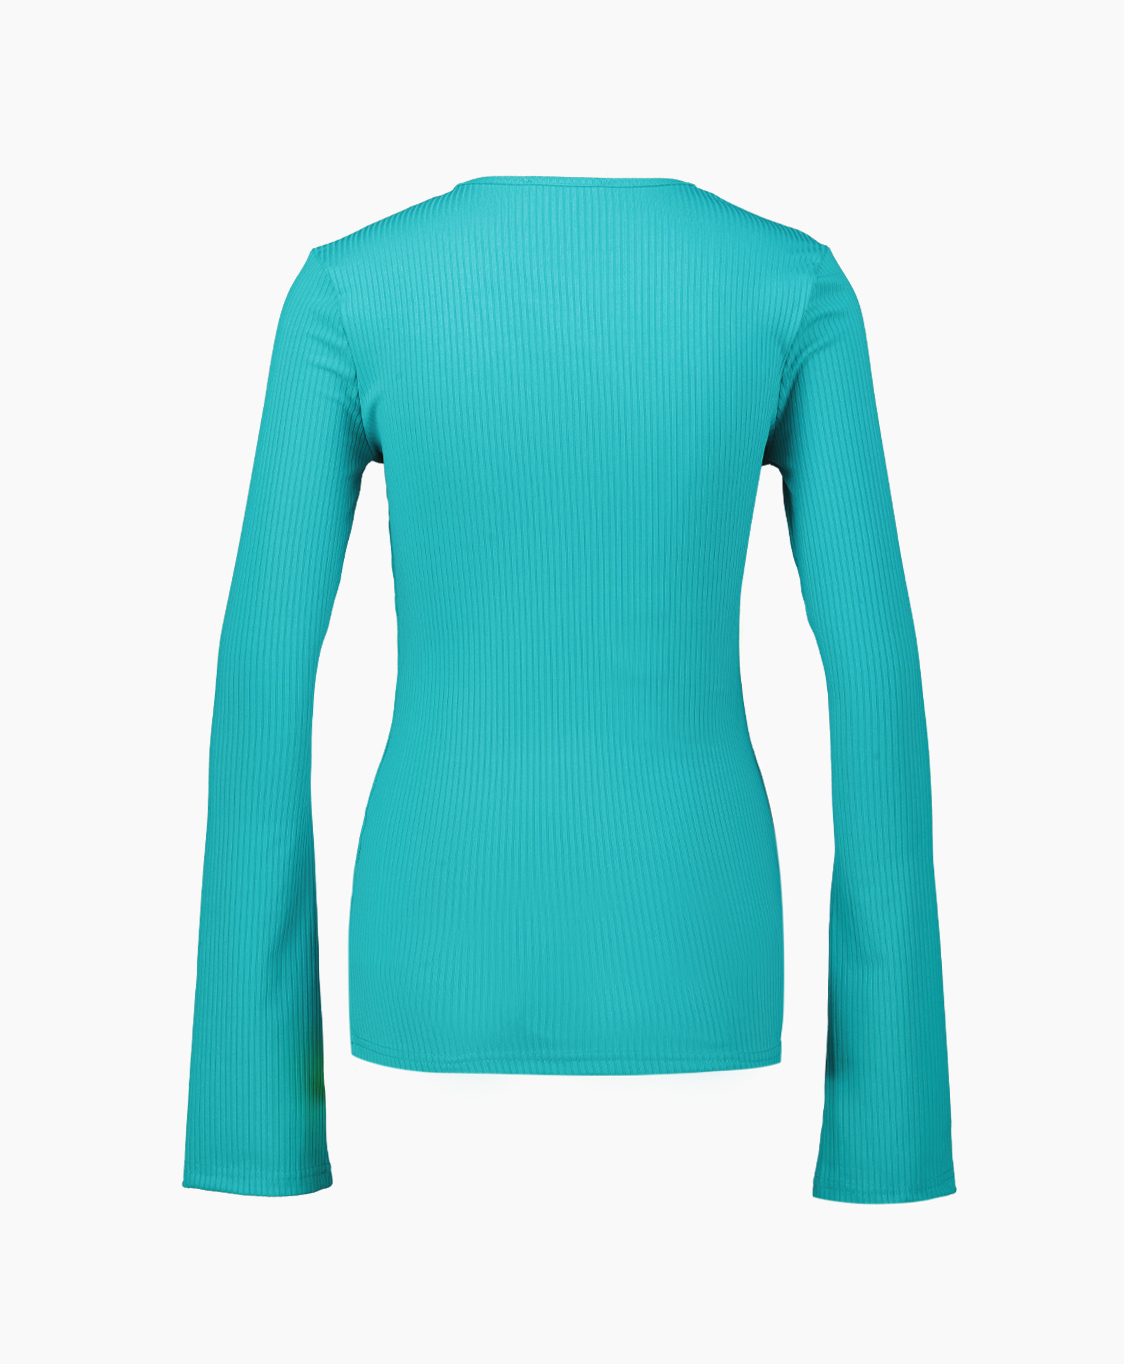 Refined Department T-shirt Selicia turquoise